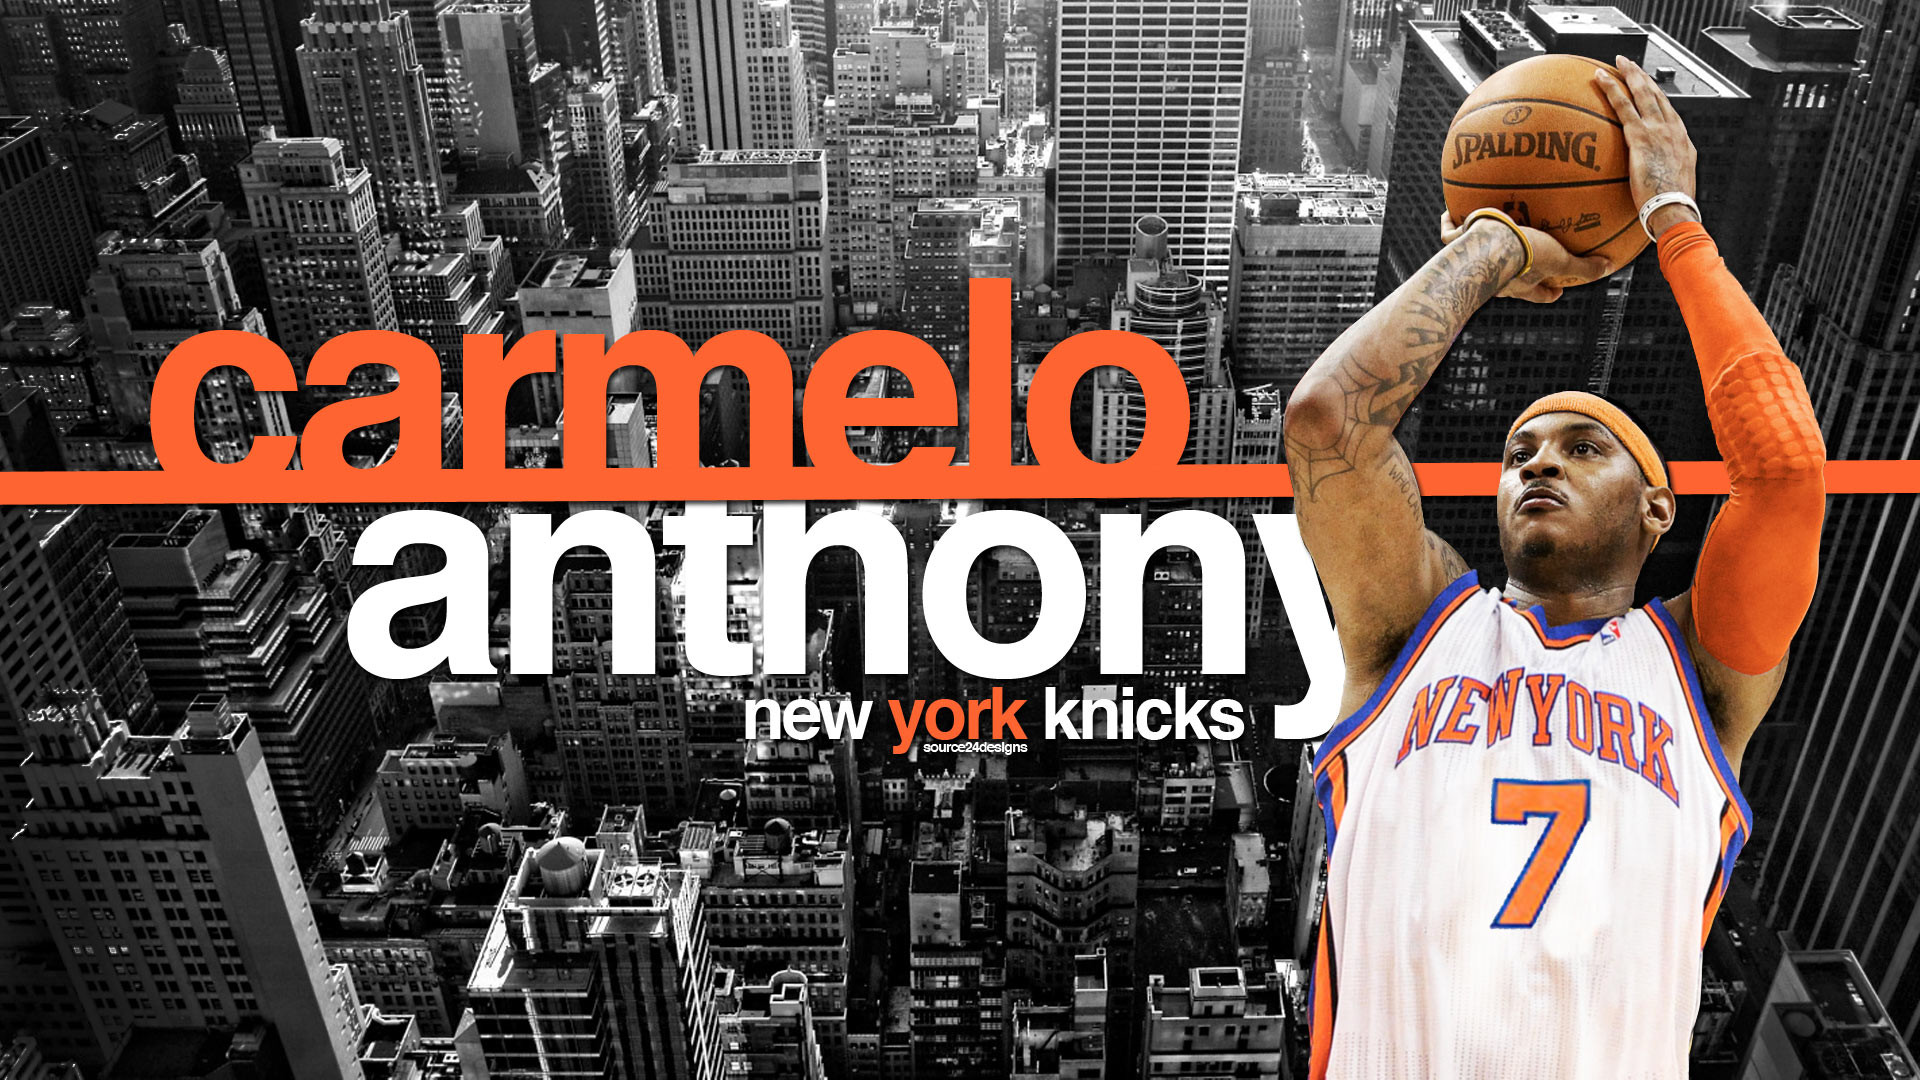 1920x1080 Carmelo Anthony Wallpaper – In New York Knicks Jersey, Fighting for .